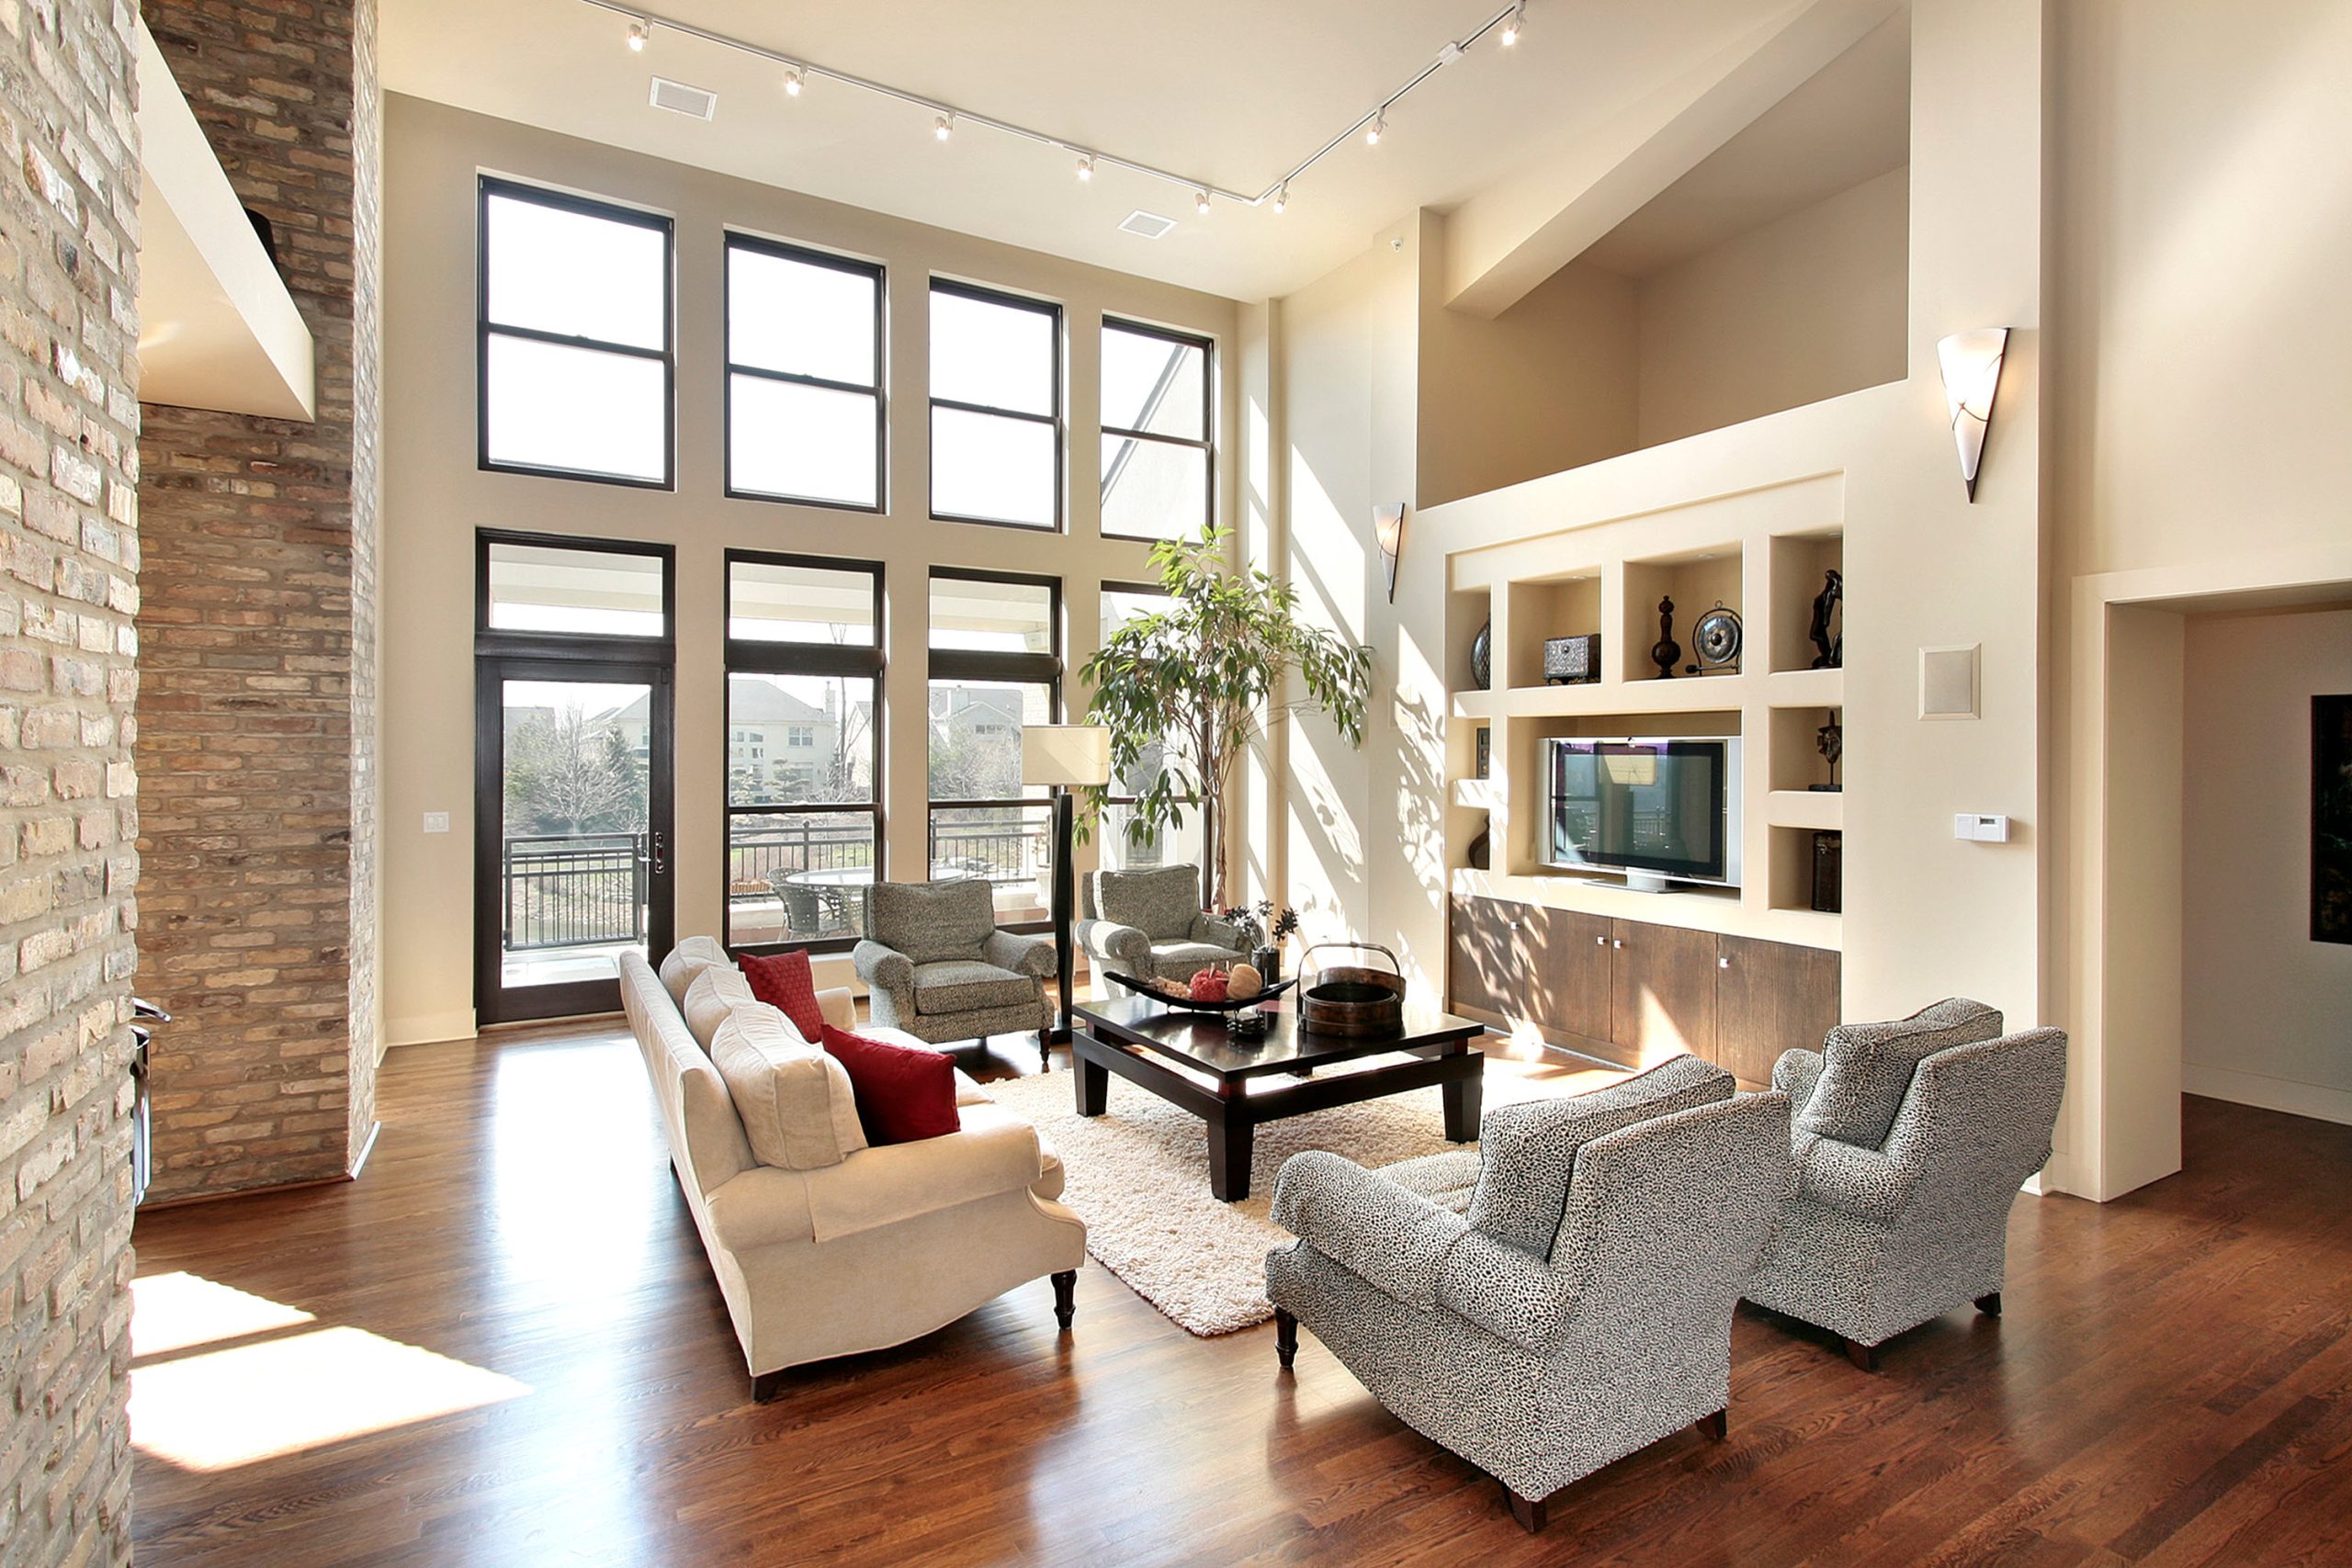 A living room with some quality windows.